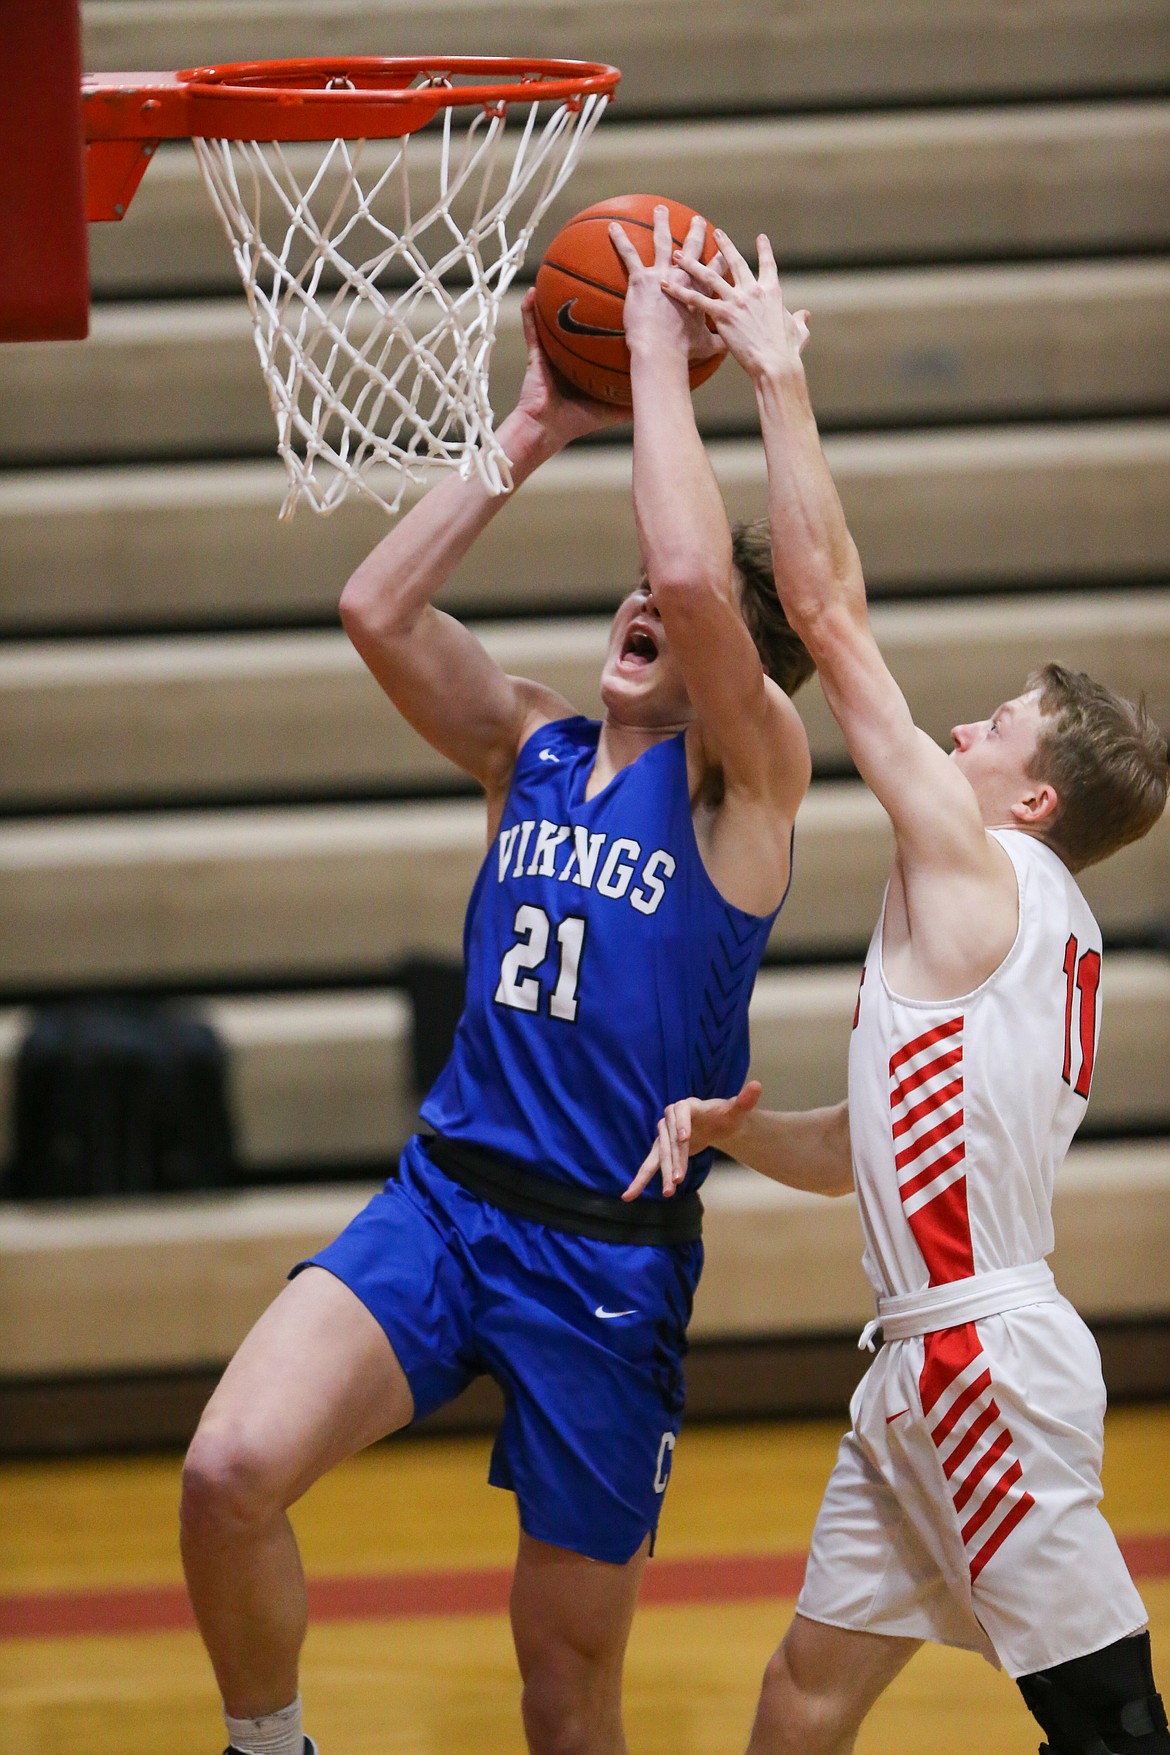 JASON DUCHOW PHOTOGRAPHY
Cameren Cope of Coeur d'Alene drives to the basket against Sandpoint on Thursday night in Sandpoint.